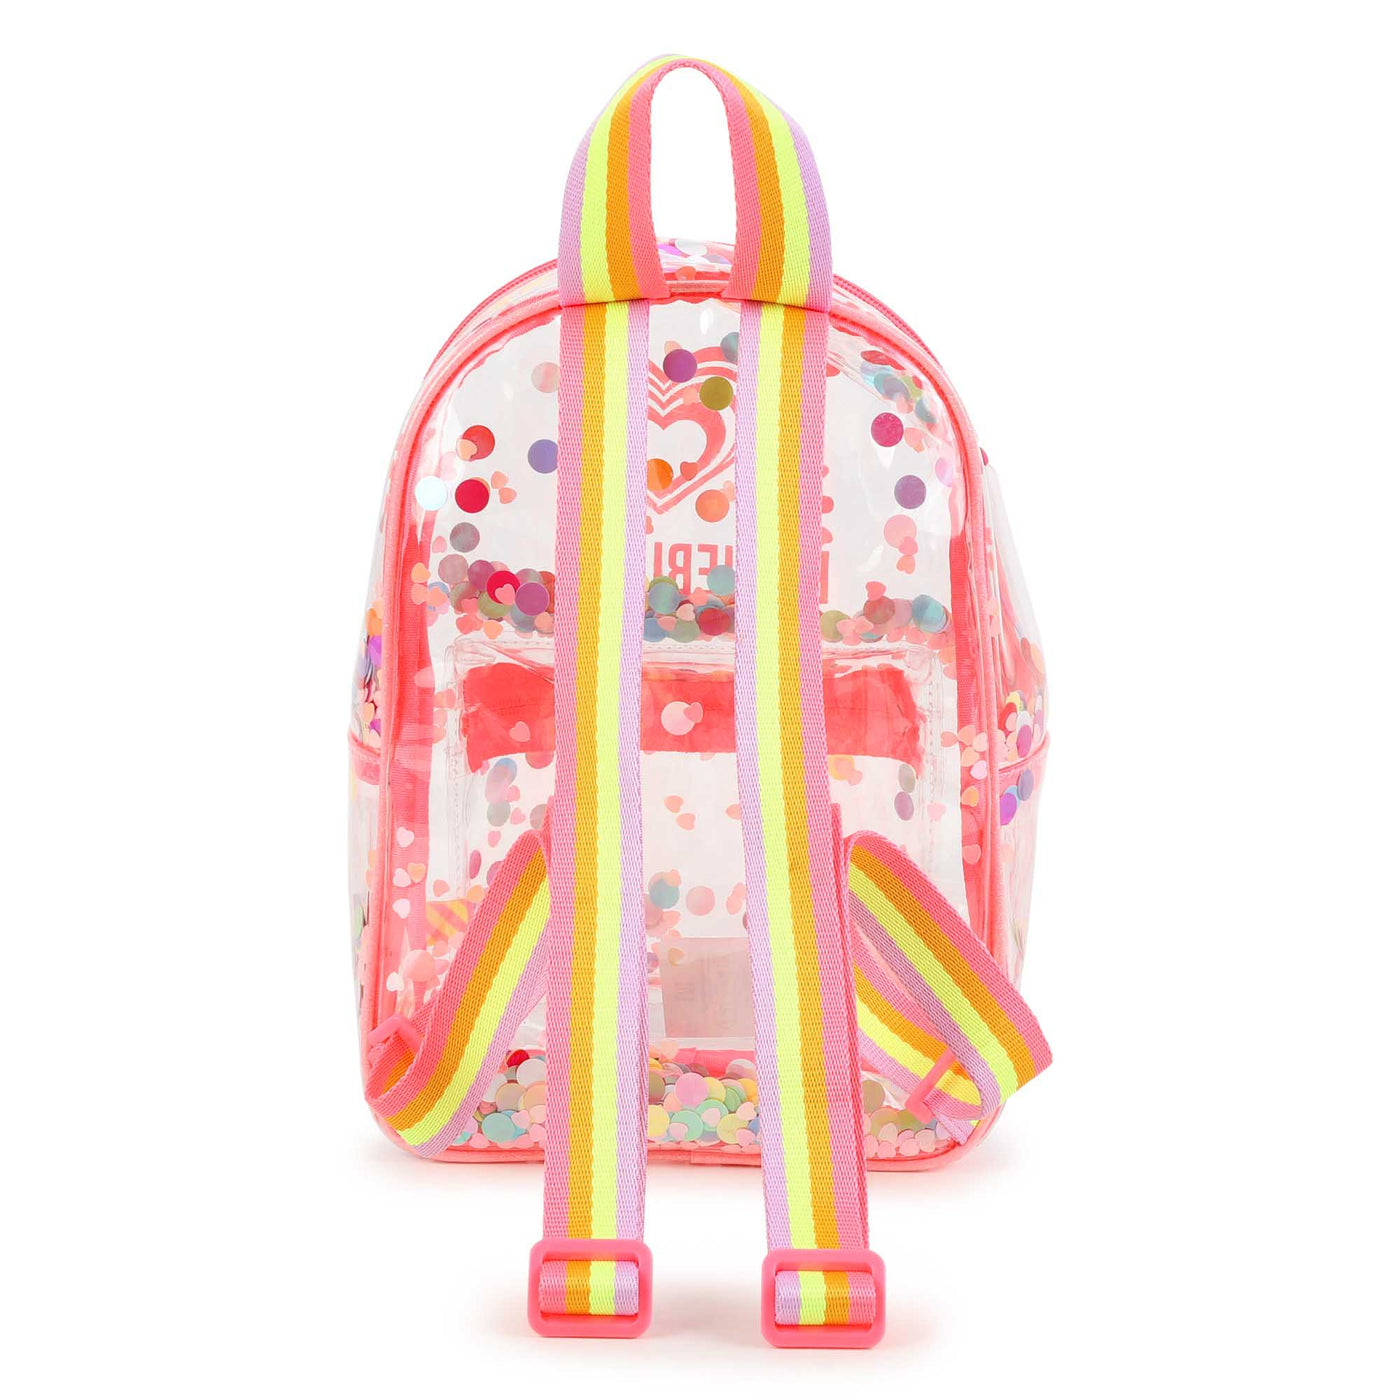 Clear Sequin Backpack by Billieblush